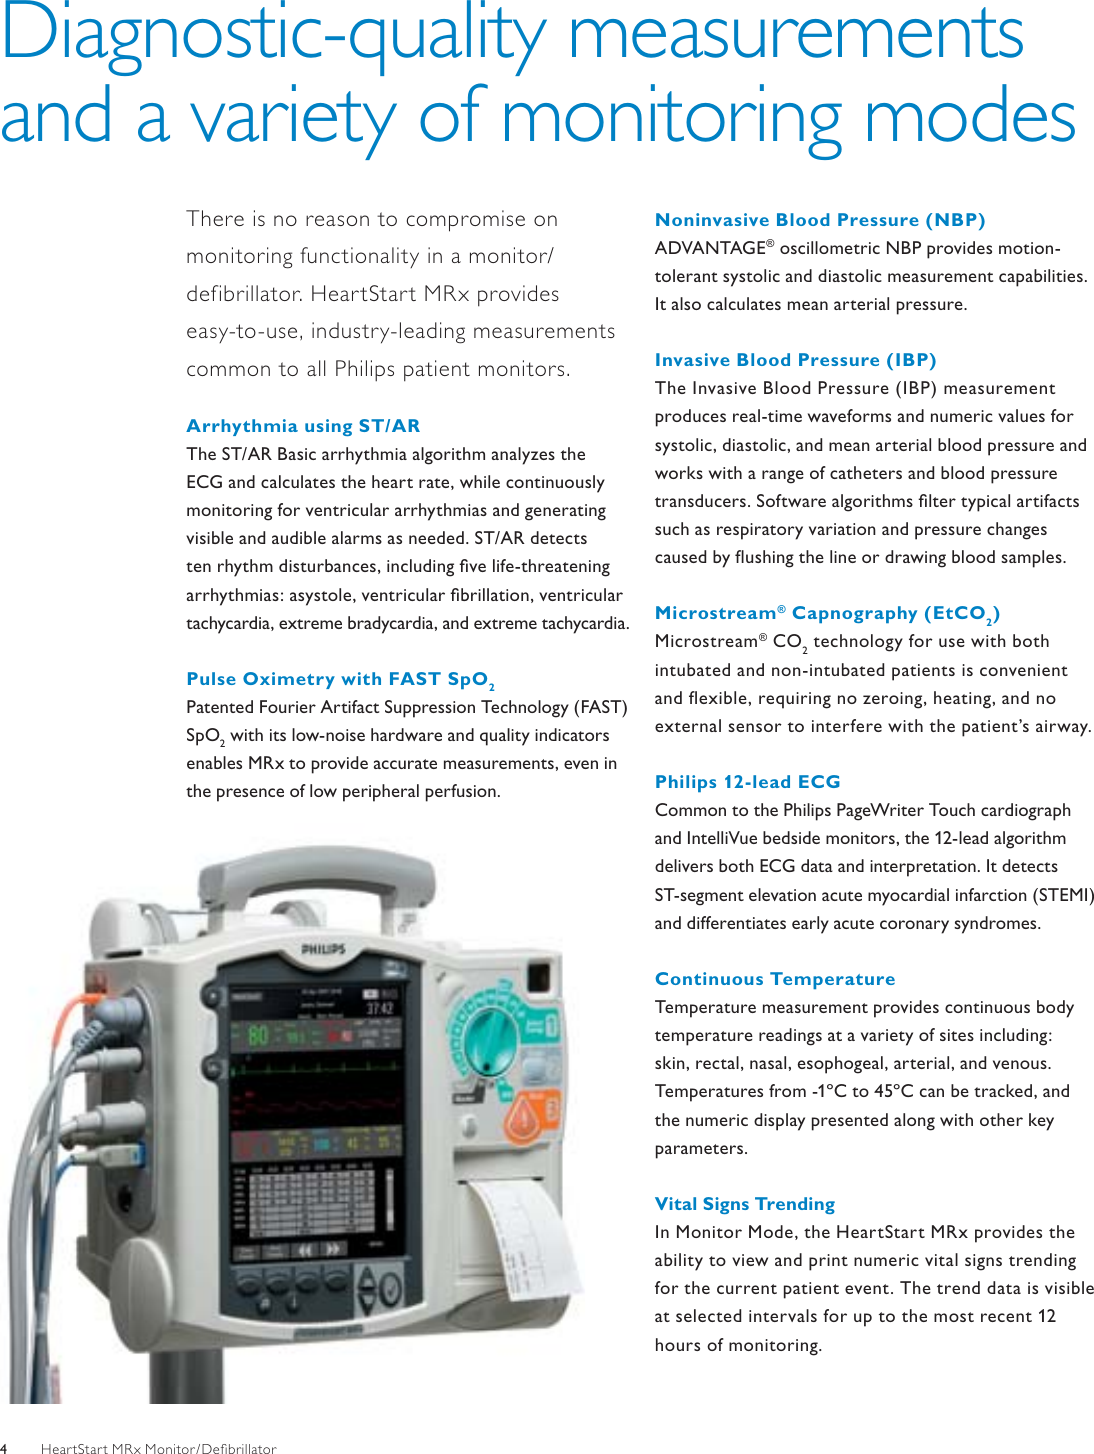 Page 4 of 12 - Philips 4522_962_24371 MRx Monitor/Defibrillator With Q-CPR And Intelli Vue Clinical Network Brochure - Hospital (ENG)